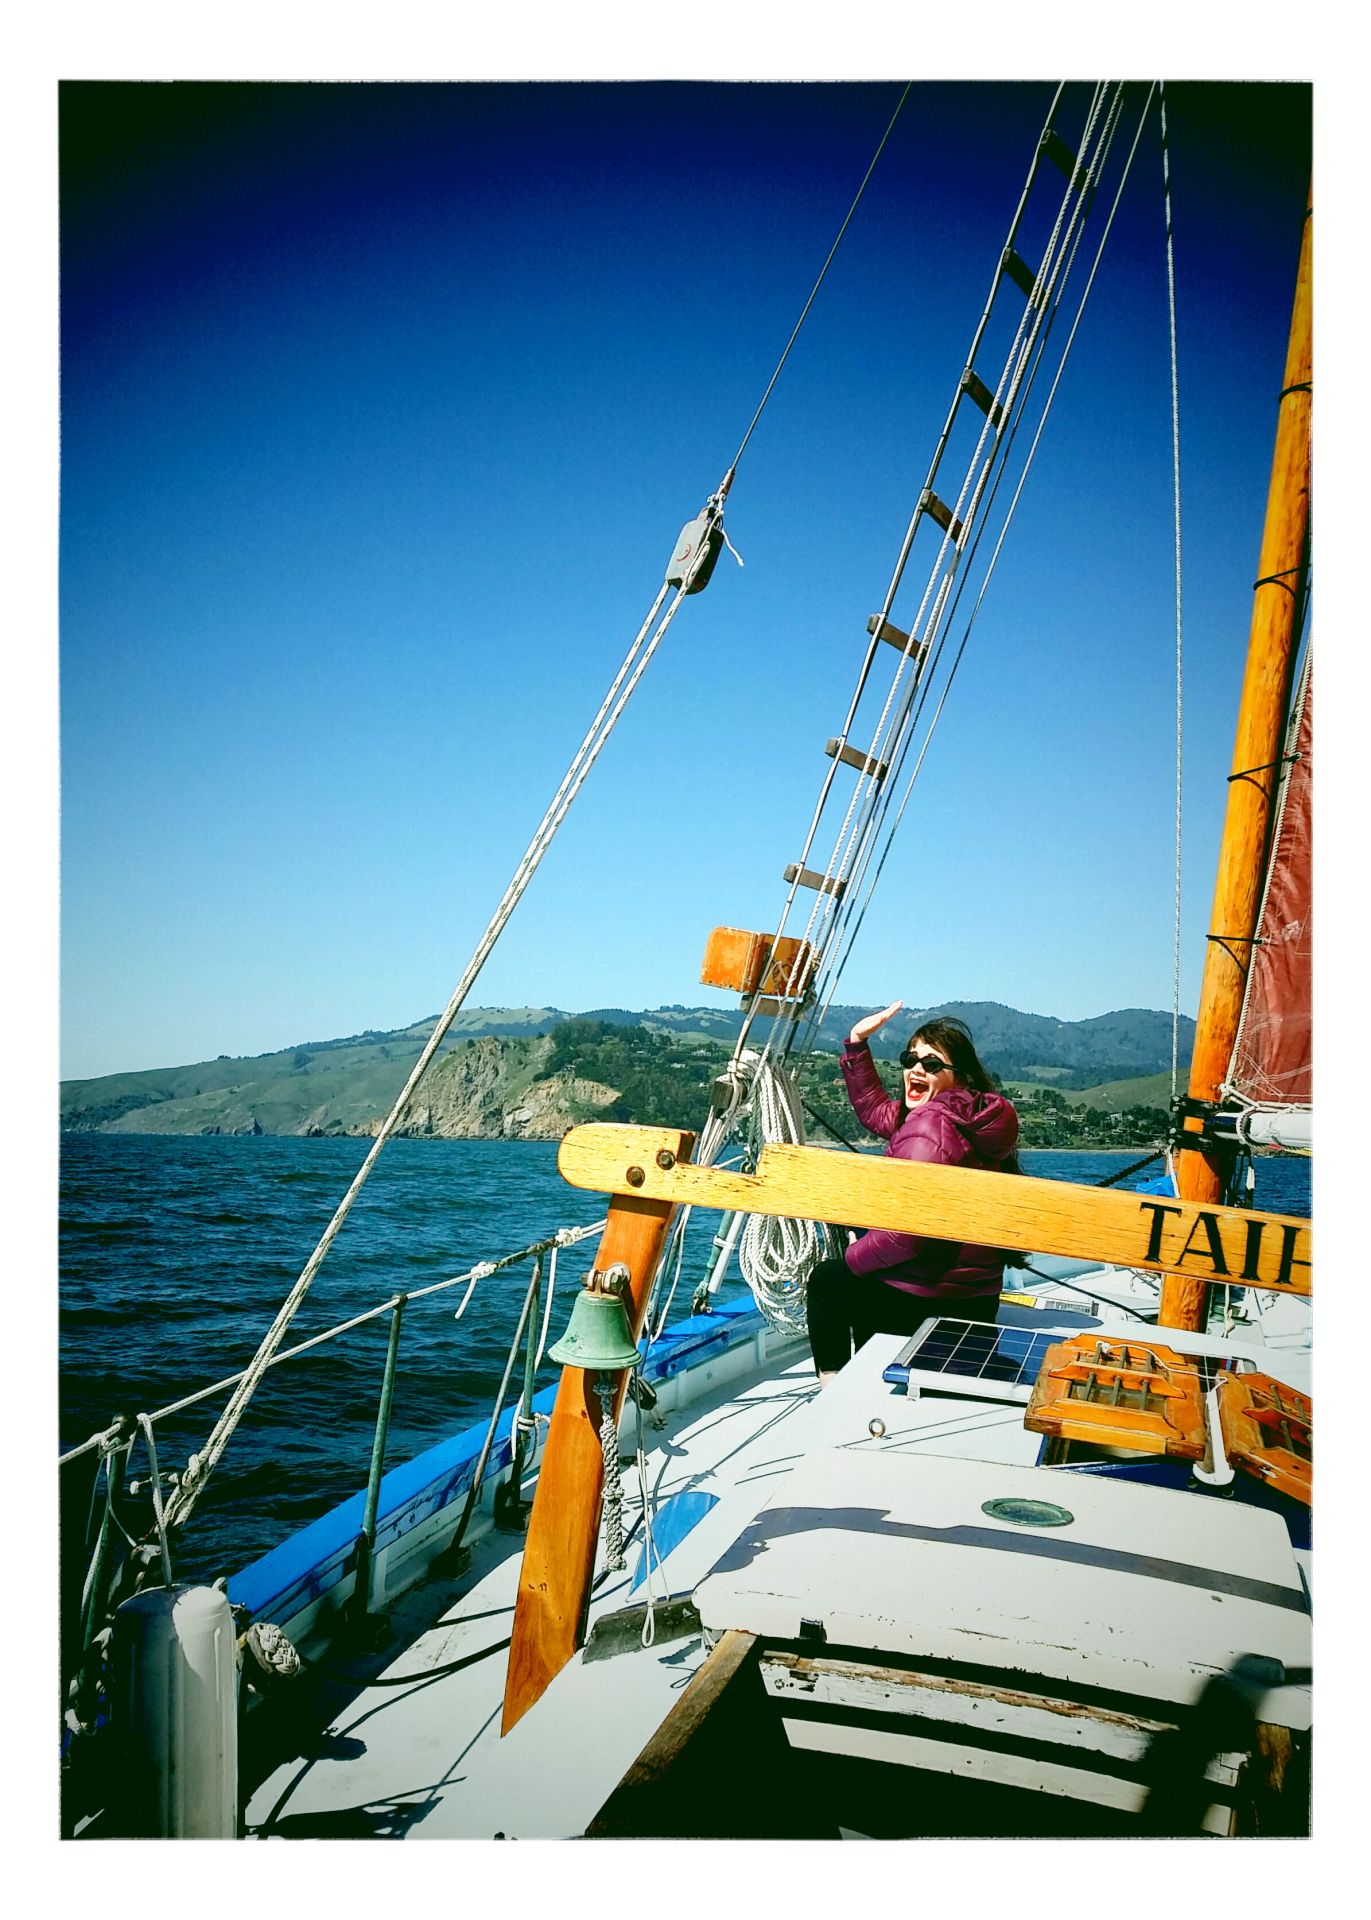 Another happy sailor showing us what to expect when sailing San Francisco Bay and the Golden Gate onboard, Taihoa, the history museum vessel out of Sausalito.